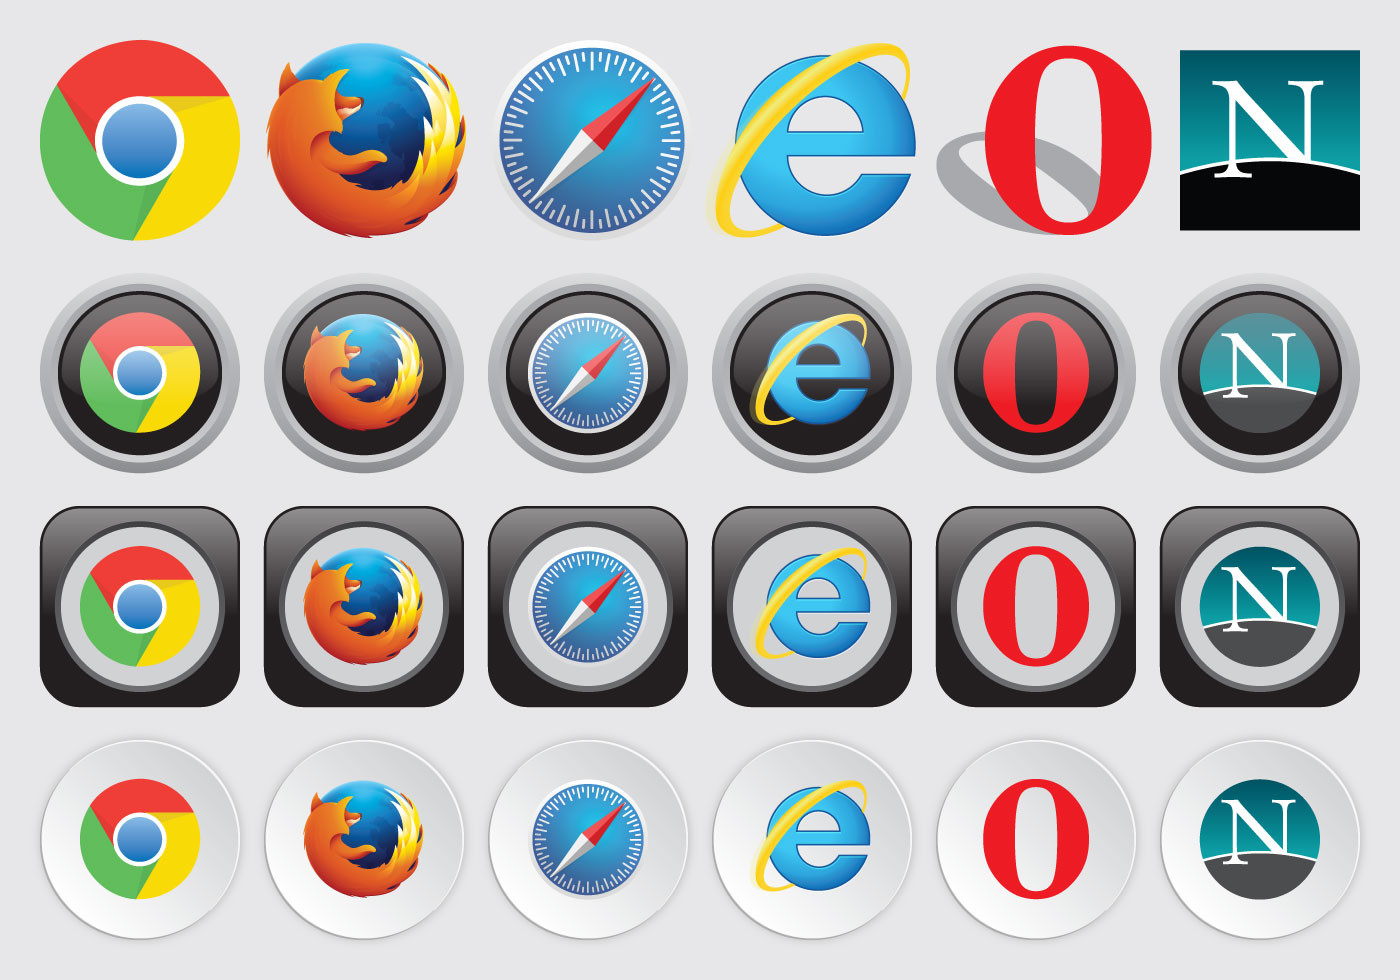 Web Browser Logos - Download Free Vector Art, Stock Graphics & Images